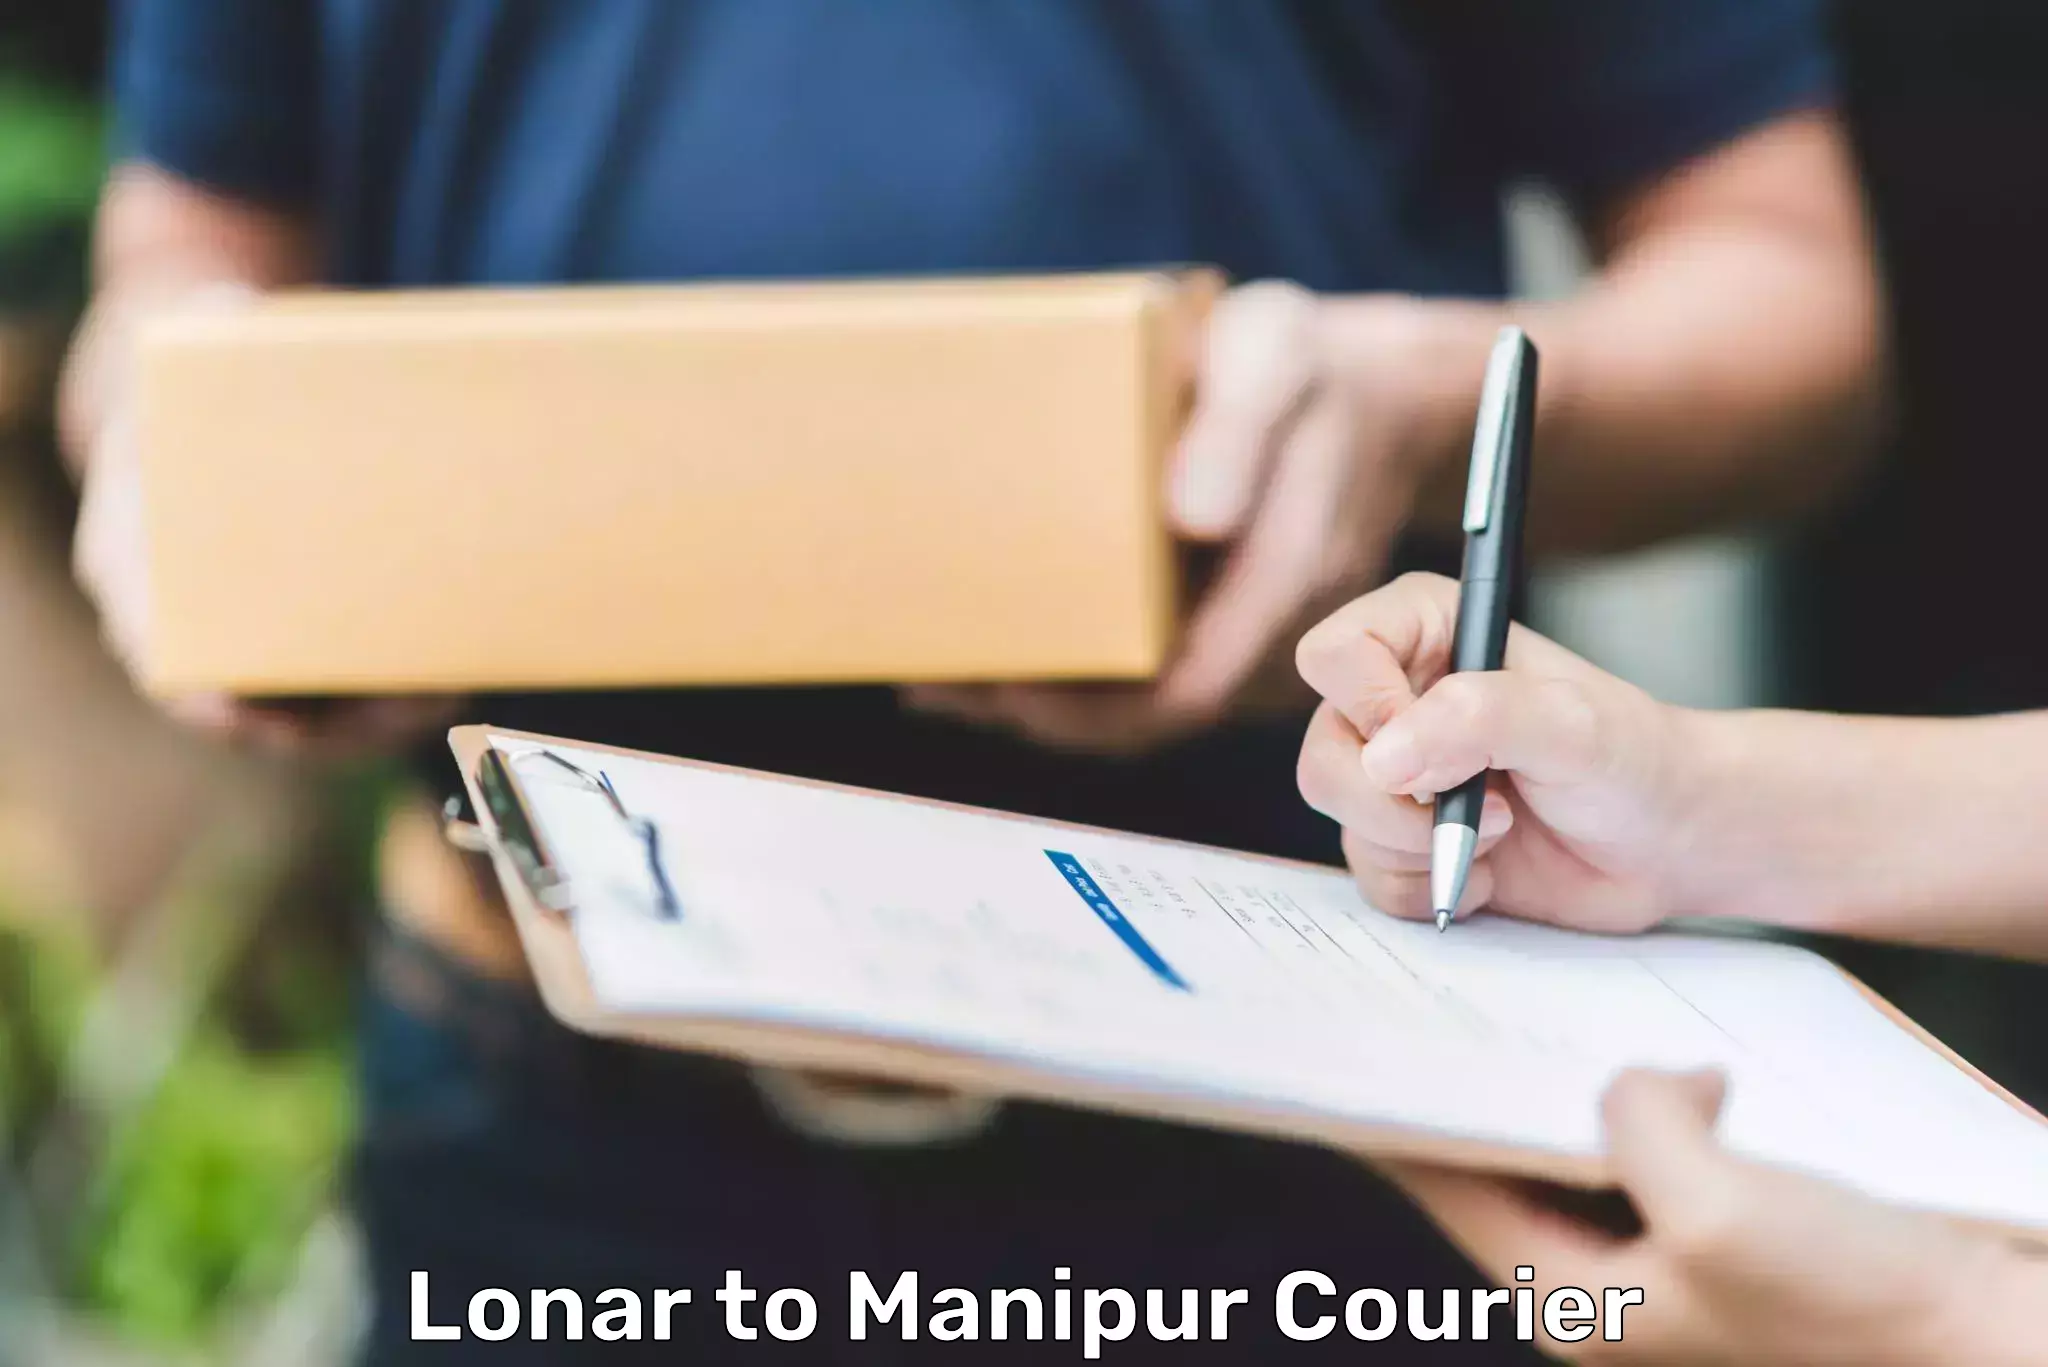 State-of-the-art courier technology Lonar to Chandel